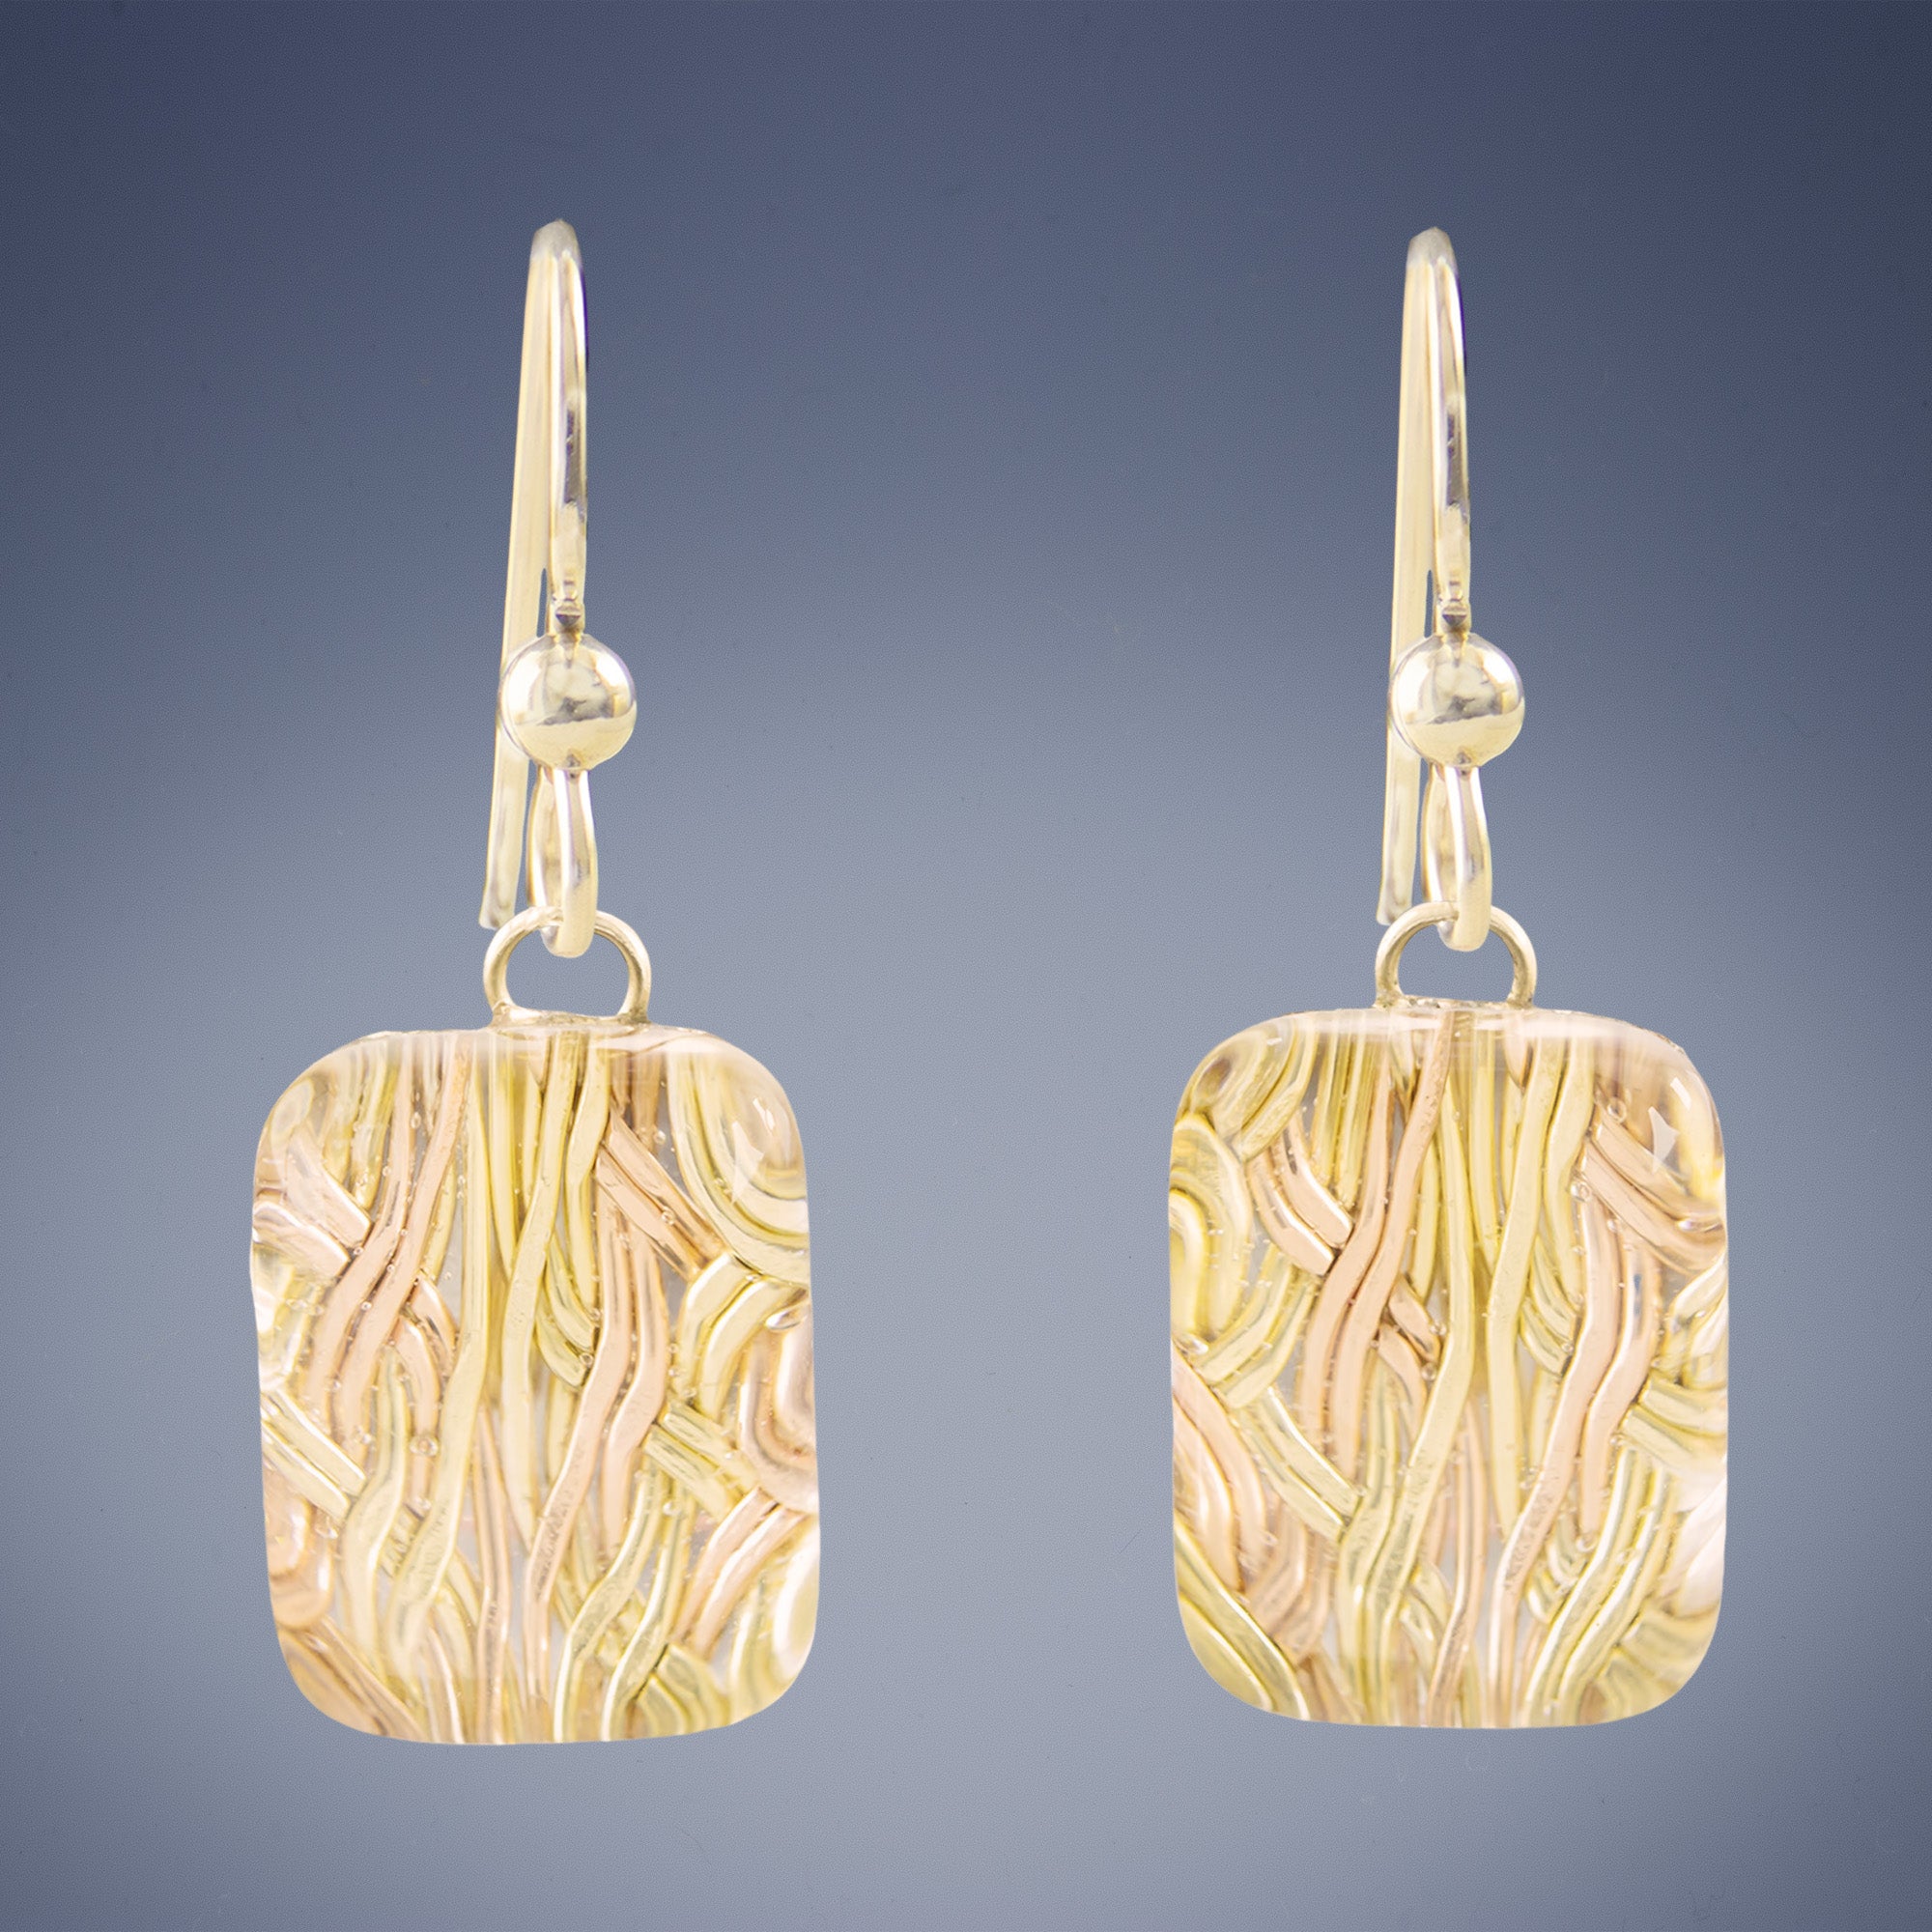 Sparkly Rectangle Shaped Earrings with Handwoven Metal Fabric and Glass in 14K Yellow and Rose Gold Fill